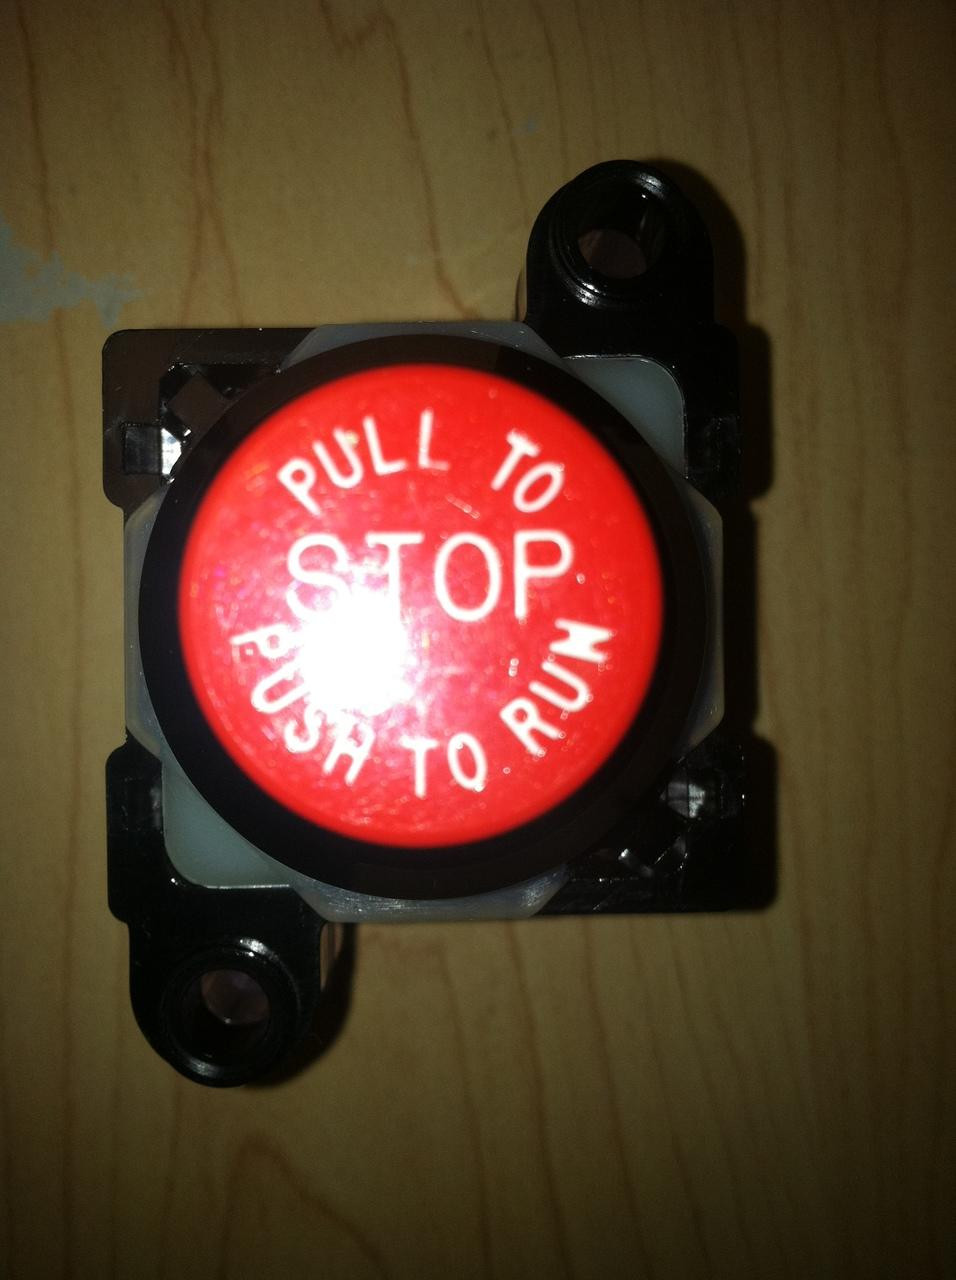 Red and green Push Button No Nc, for Elevator at Rs 25/piece in